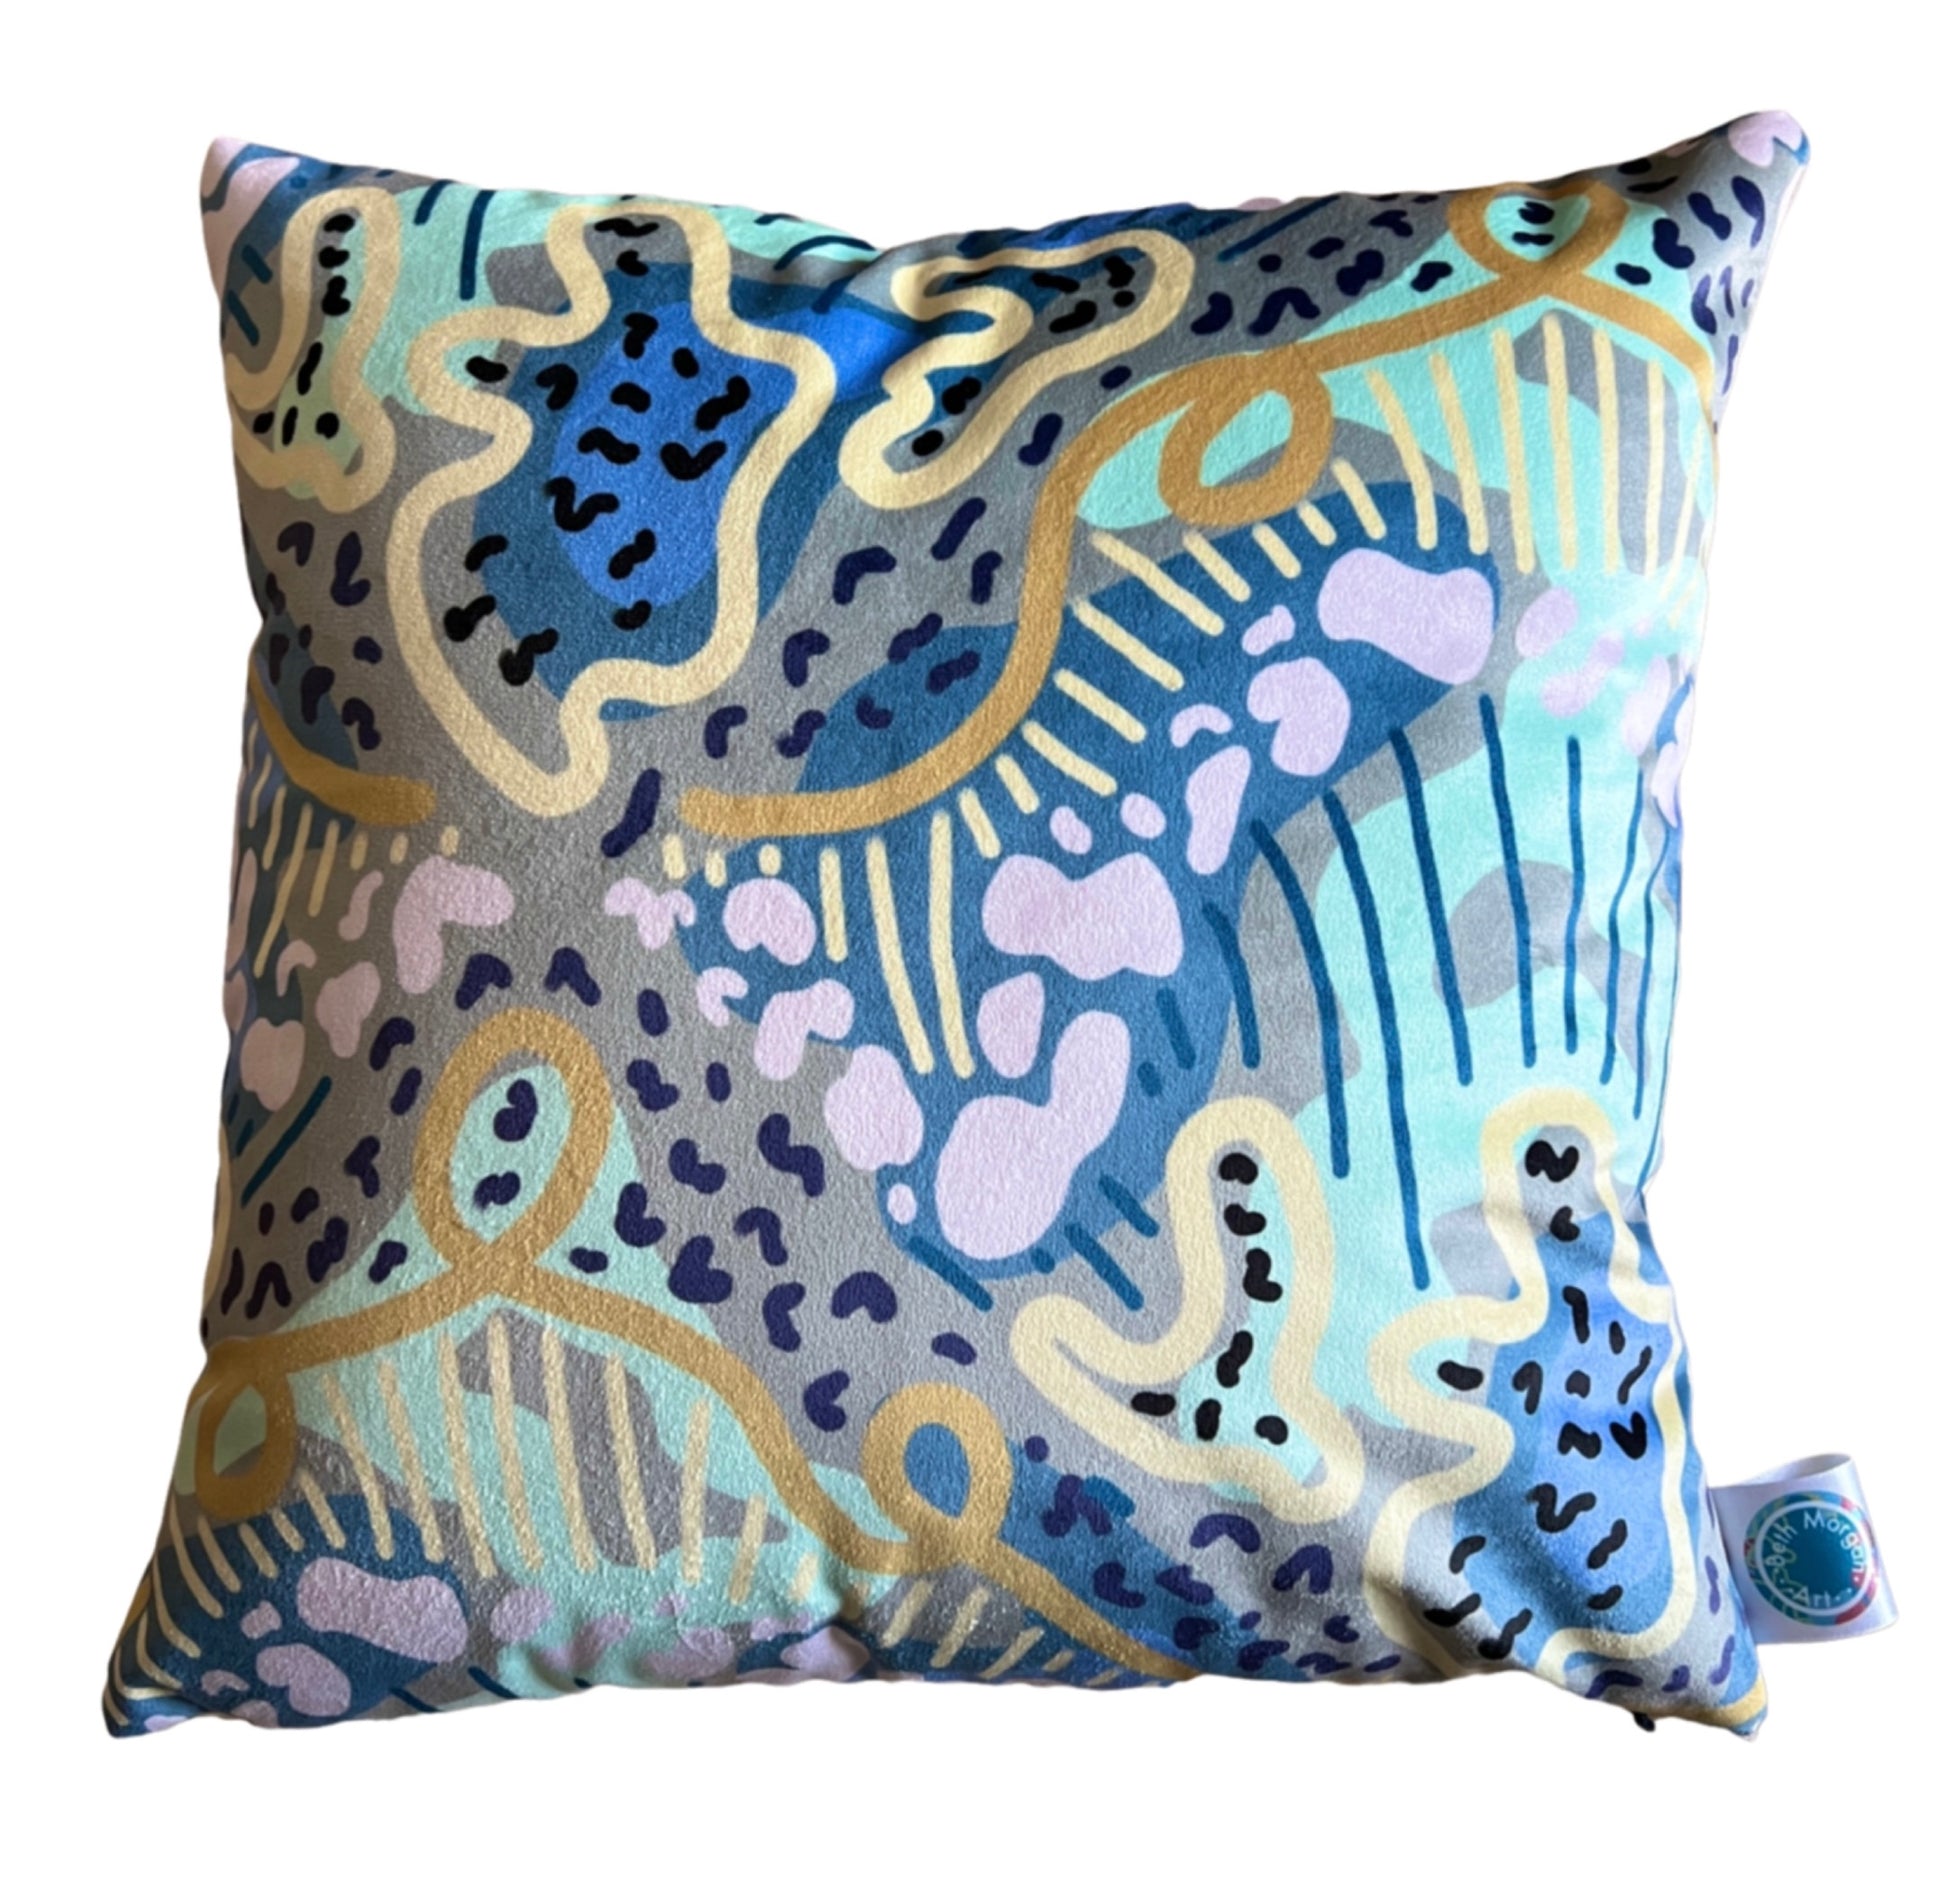 The front of the Clear Blue Skies cushion by Beth Morgan Art. It features abstract shapes and swirling lines in varying shades of blue, green and yellow.